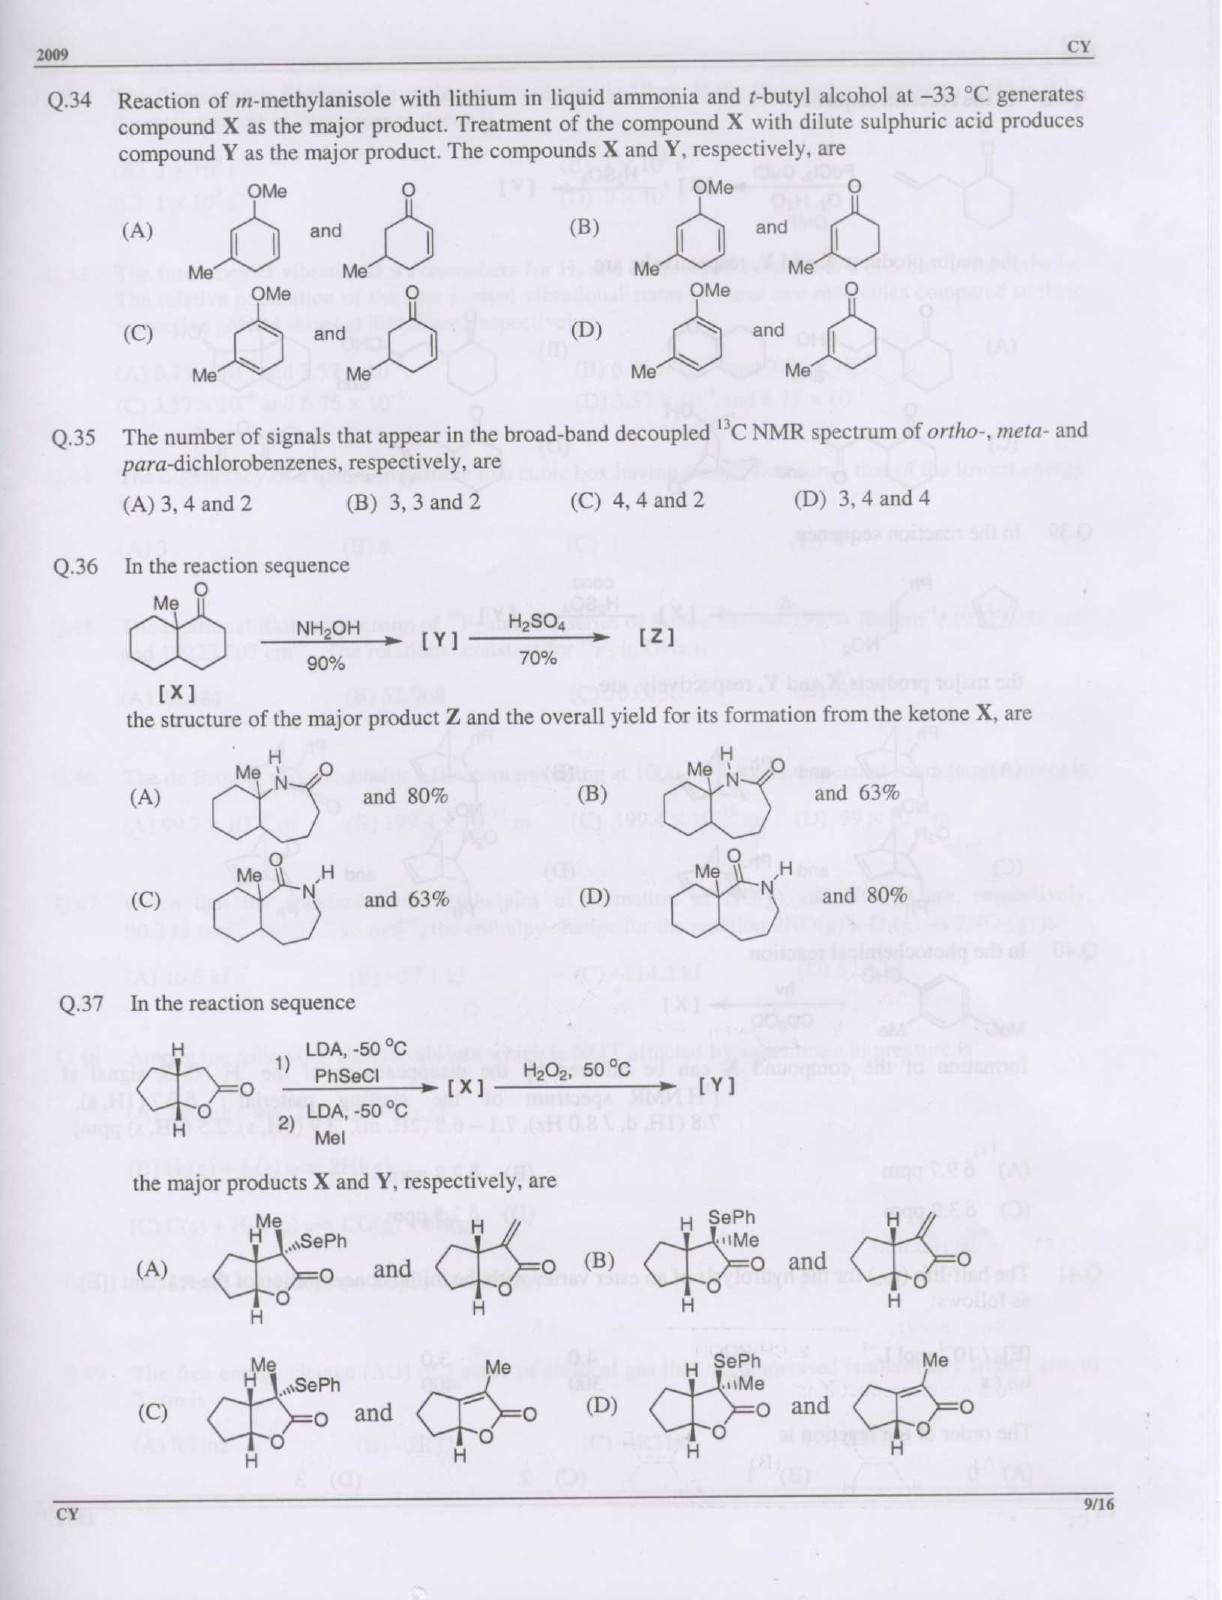 GATE Exam Question Paper 2009 Chemistry 9